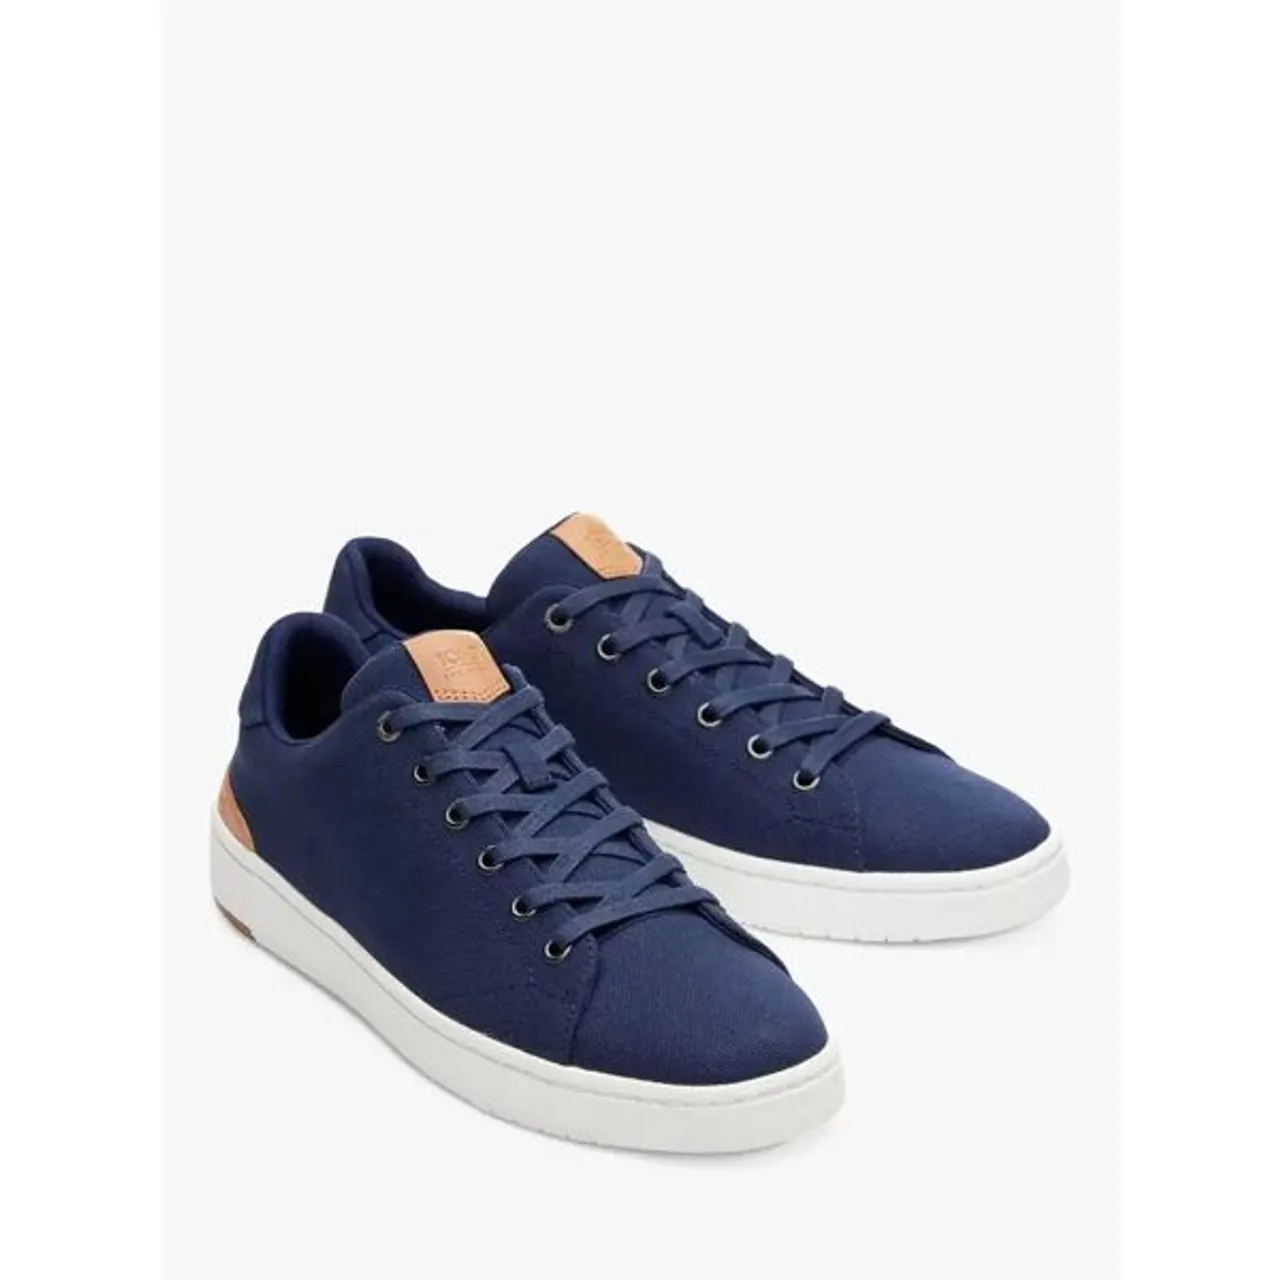 TOMS Travel Lite 2.0 Trainers - Navy - Male